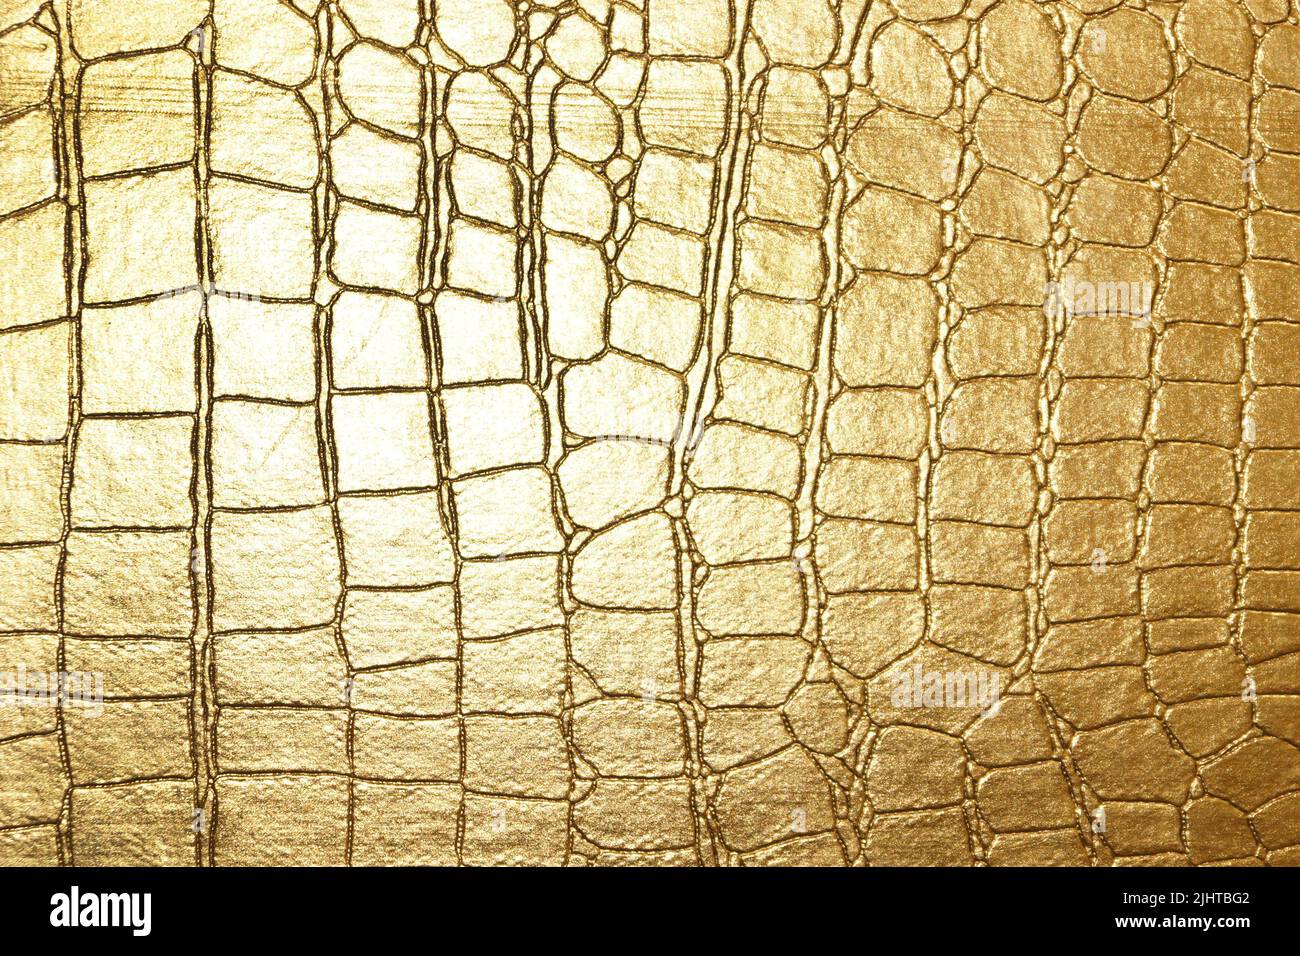 Brownish Red Faux Crocodile Skin Texture Stock Photo, Picture and Royalty  Free Image. Image 10605855.